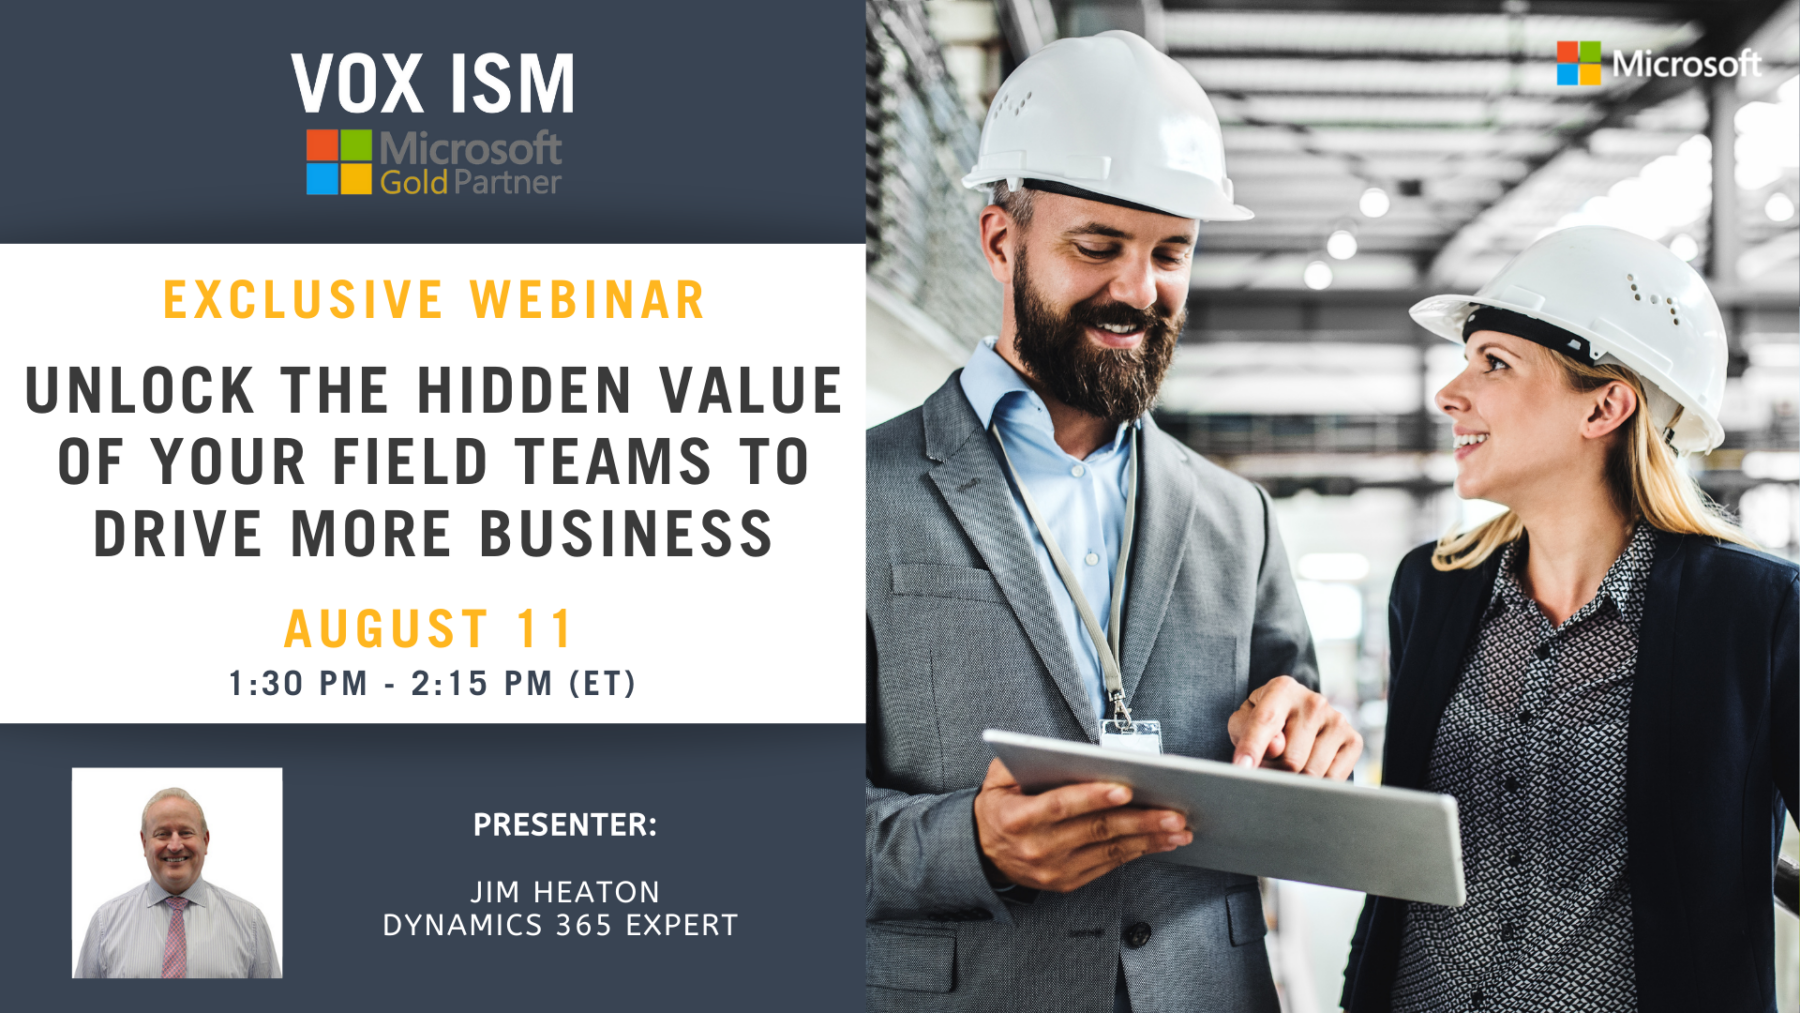 Unlock the hidden value of your field teams to drive more business - August 11 - Webinar